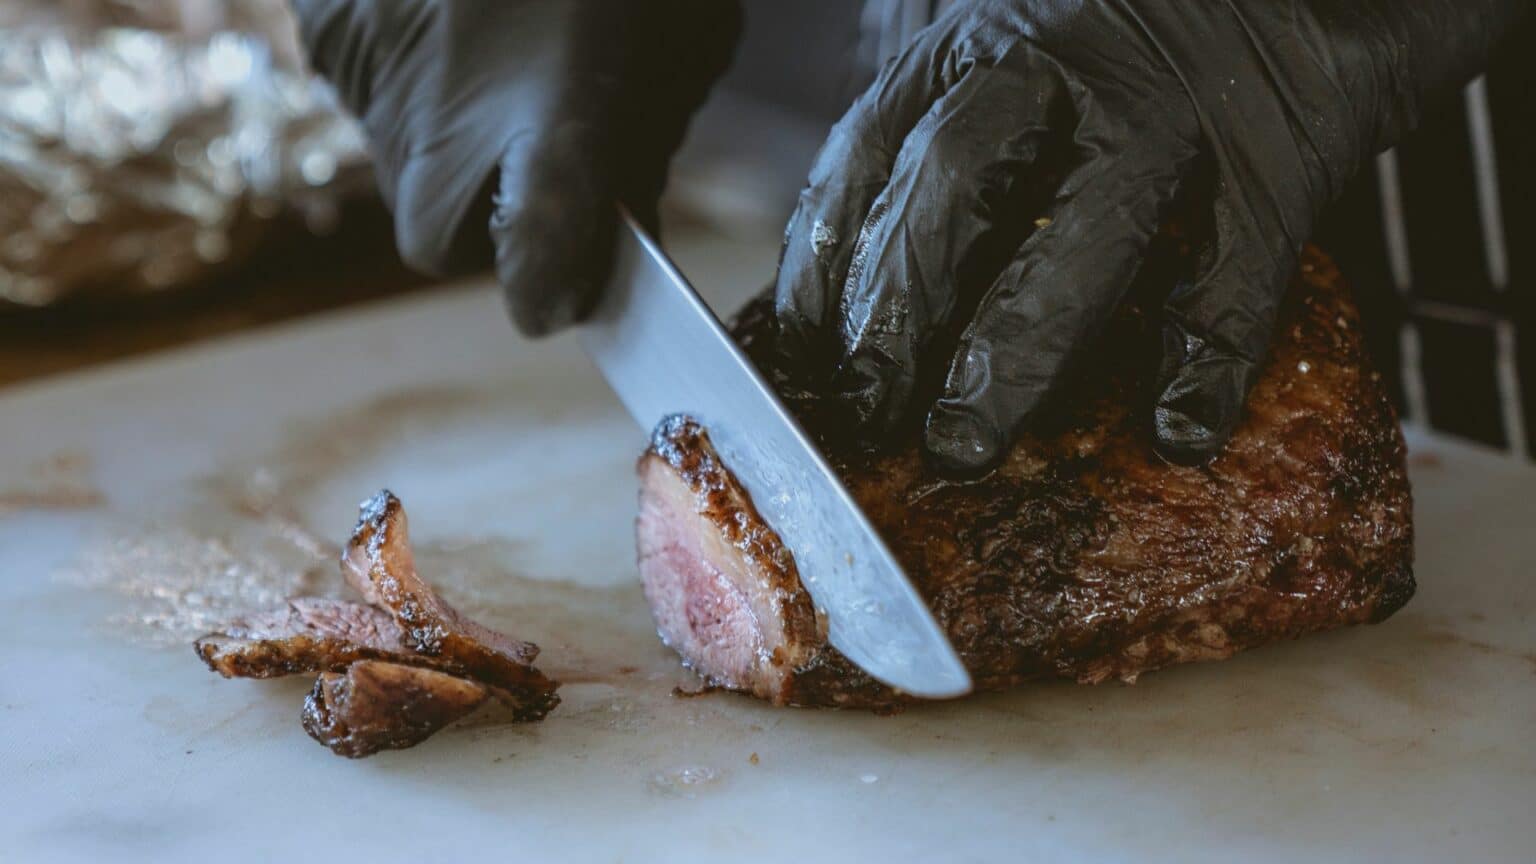 What factors should you consider when choosing an appropriate steak knife for your meat